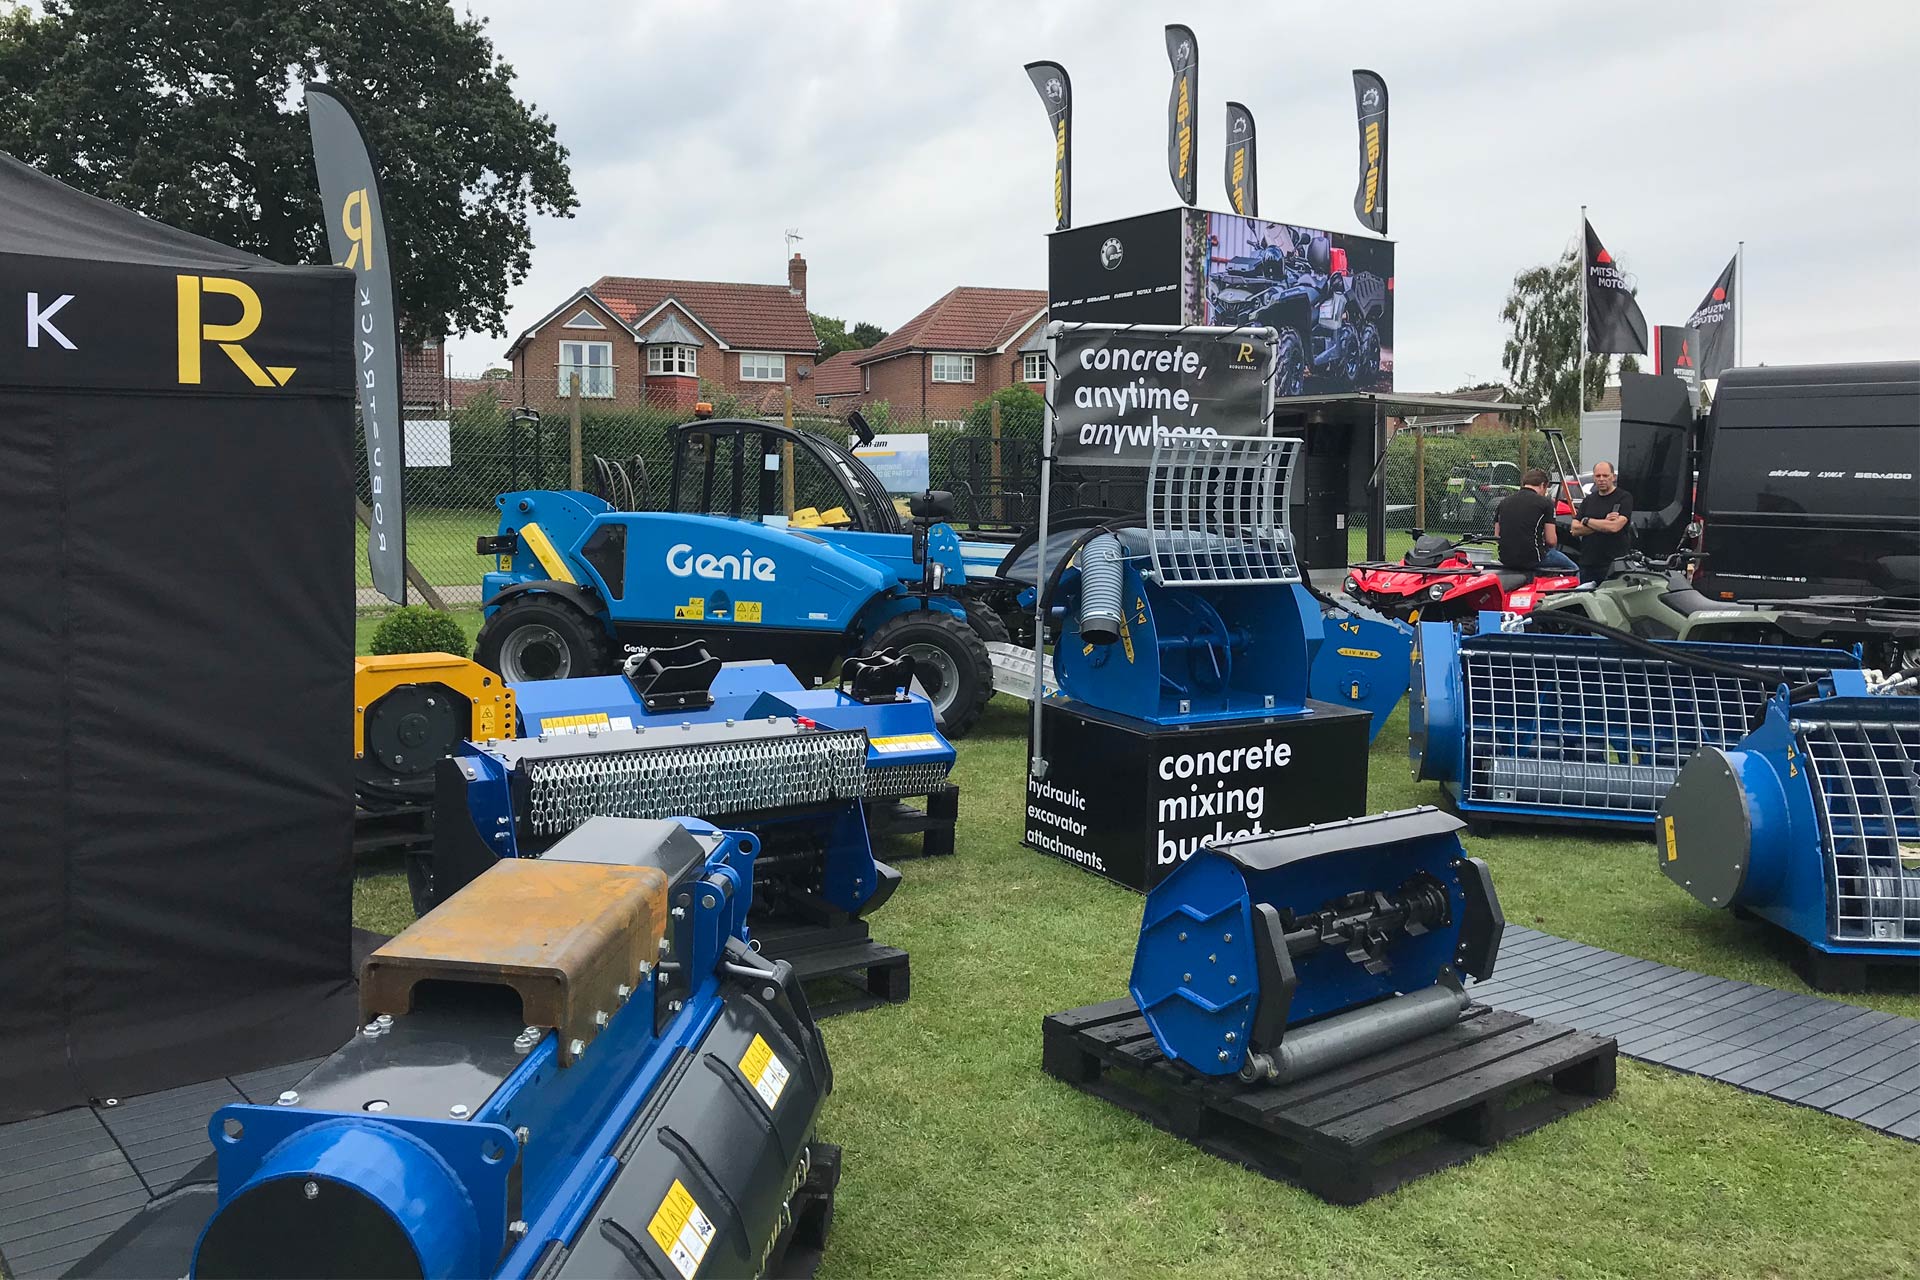 Robustrack show stand with blue excavator attachments